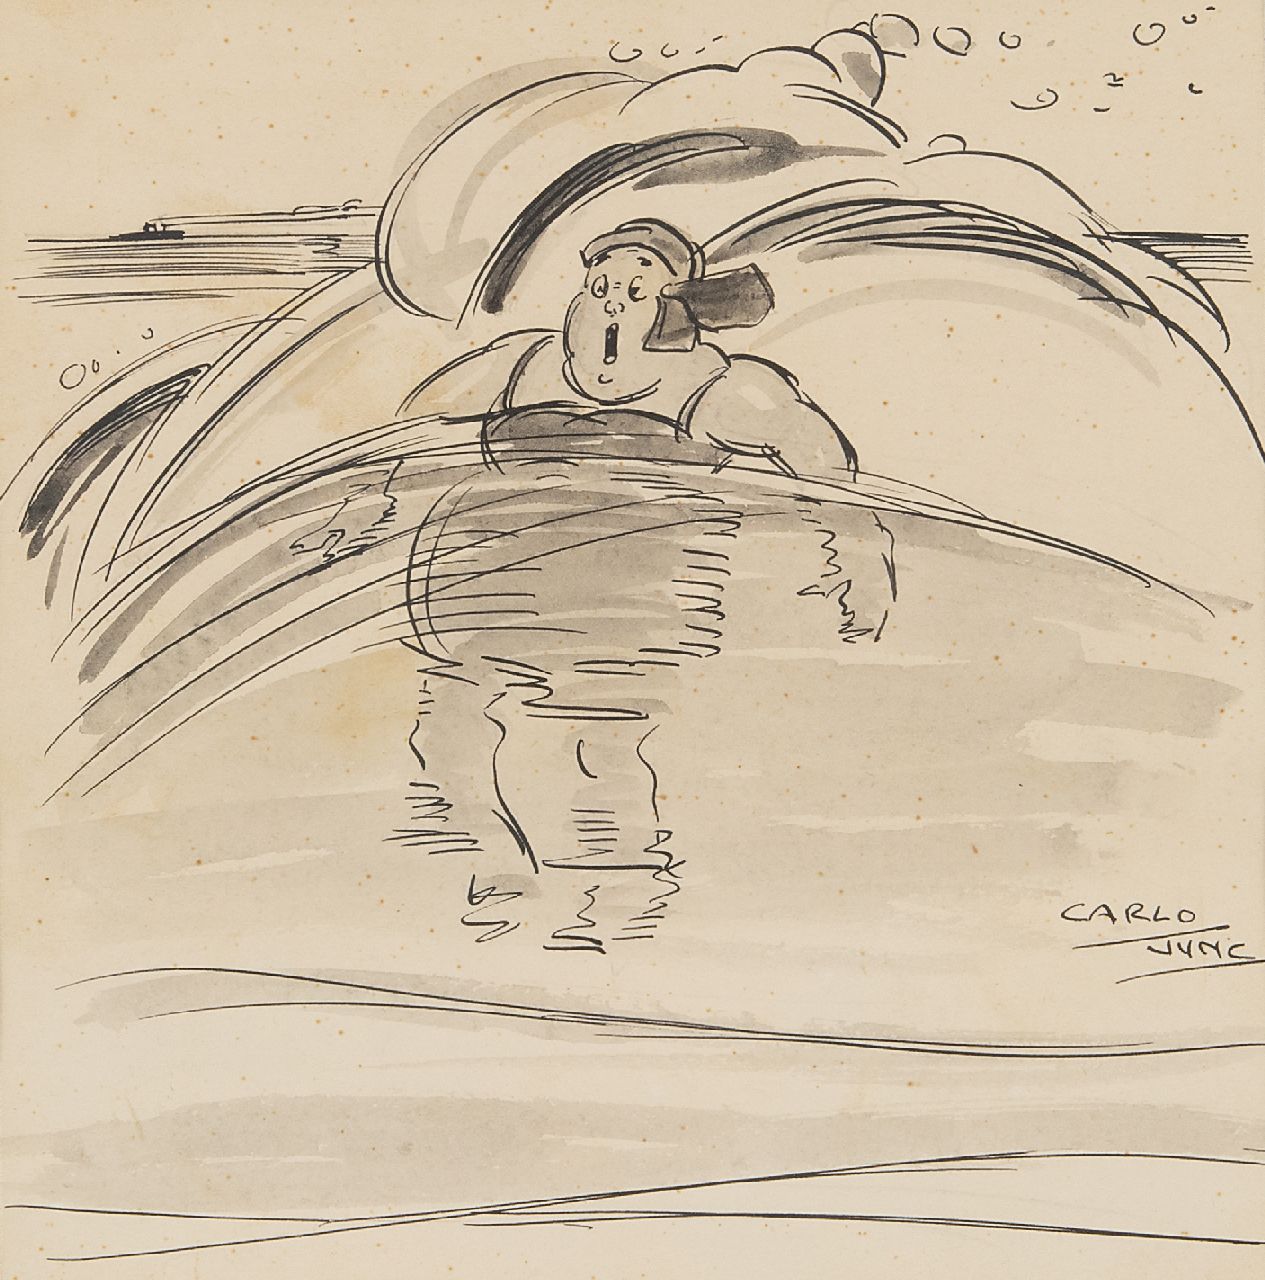 Jung C.H.  | Carel Hendrik 'Carlo' Jung | Watercolours and drawings offered for sale | The unexpected wave, Indian ink on paper 20.0 x 19.0 cm, signed l.r.